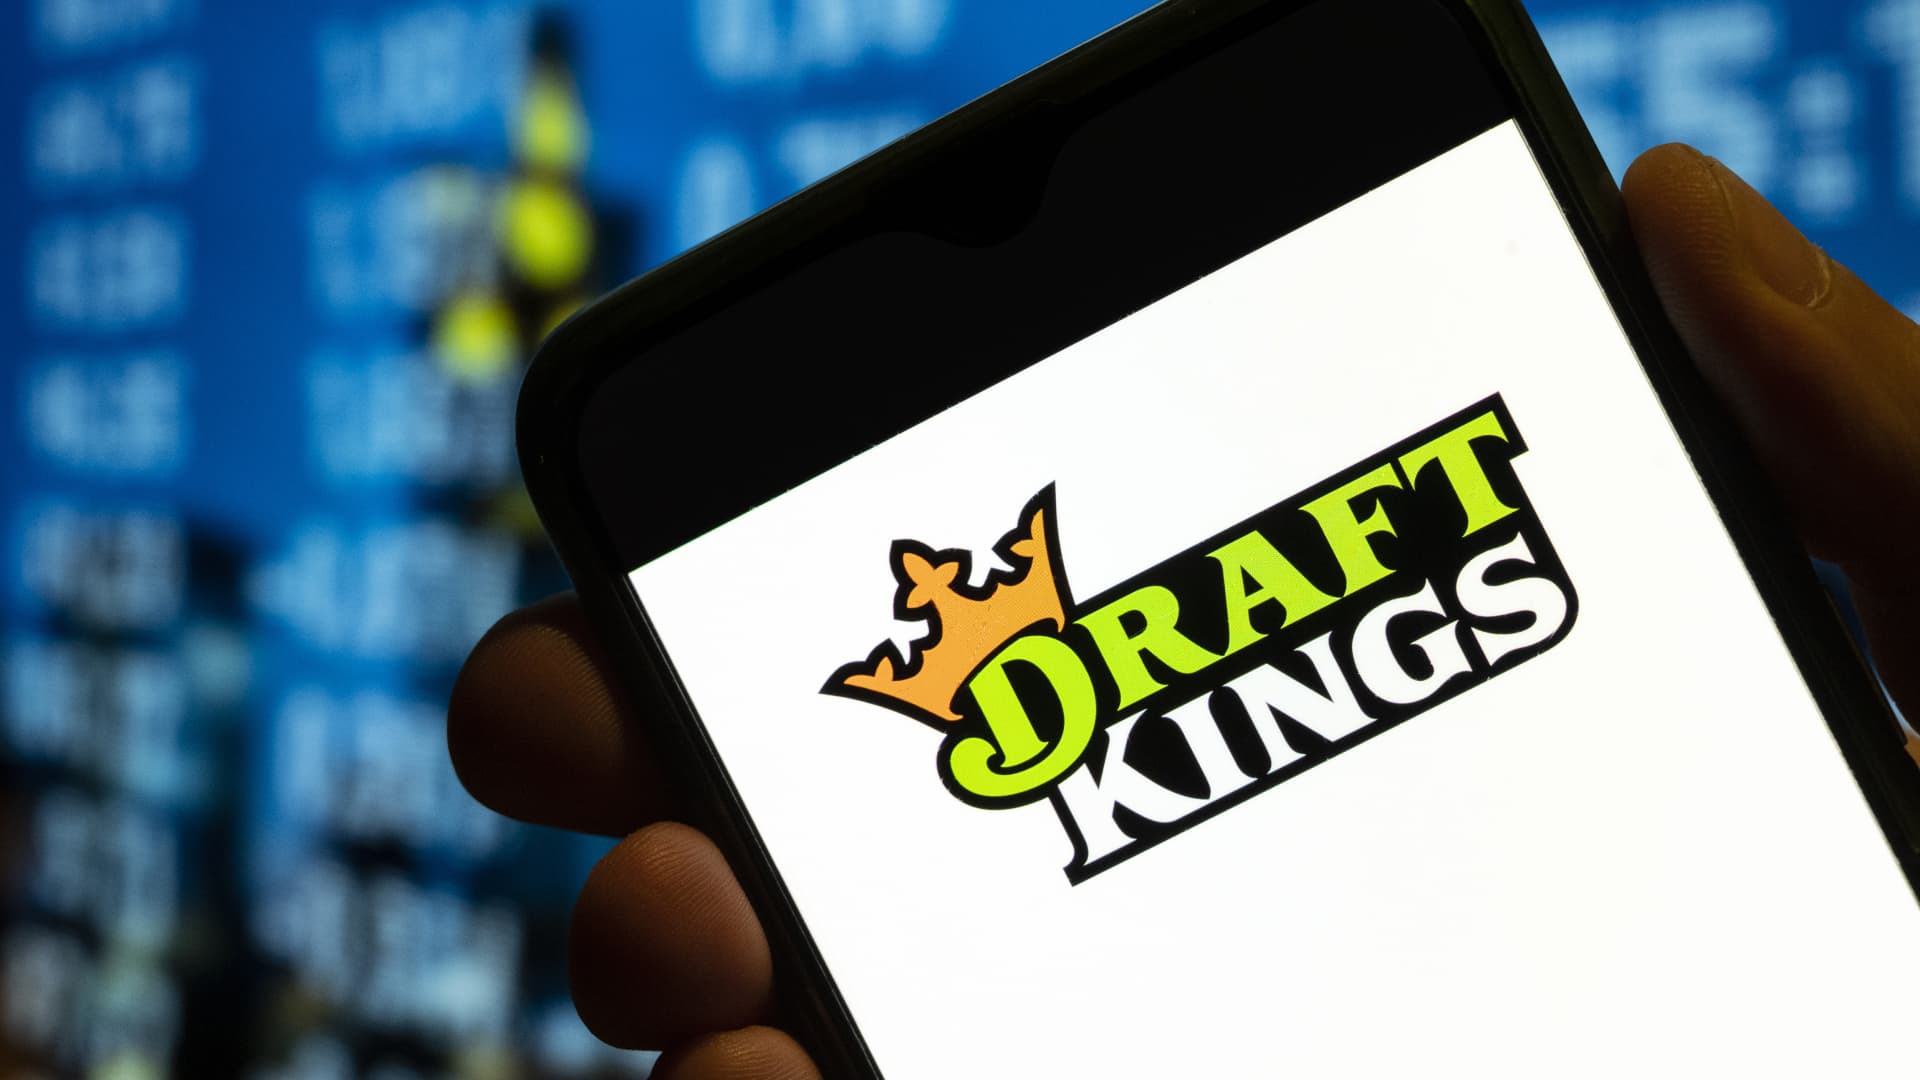 DraftKings stock surges after sports-betting company boosts outlook